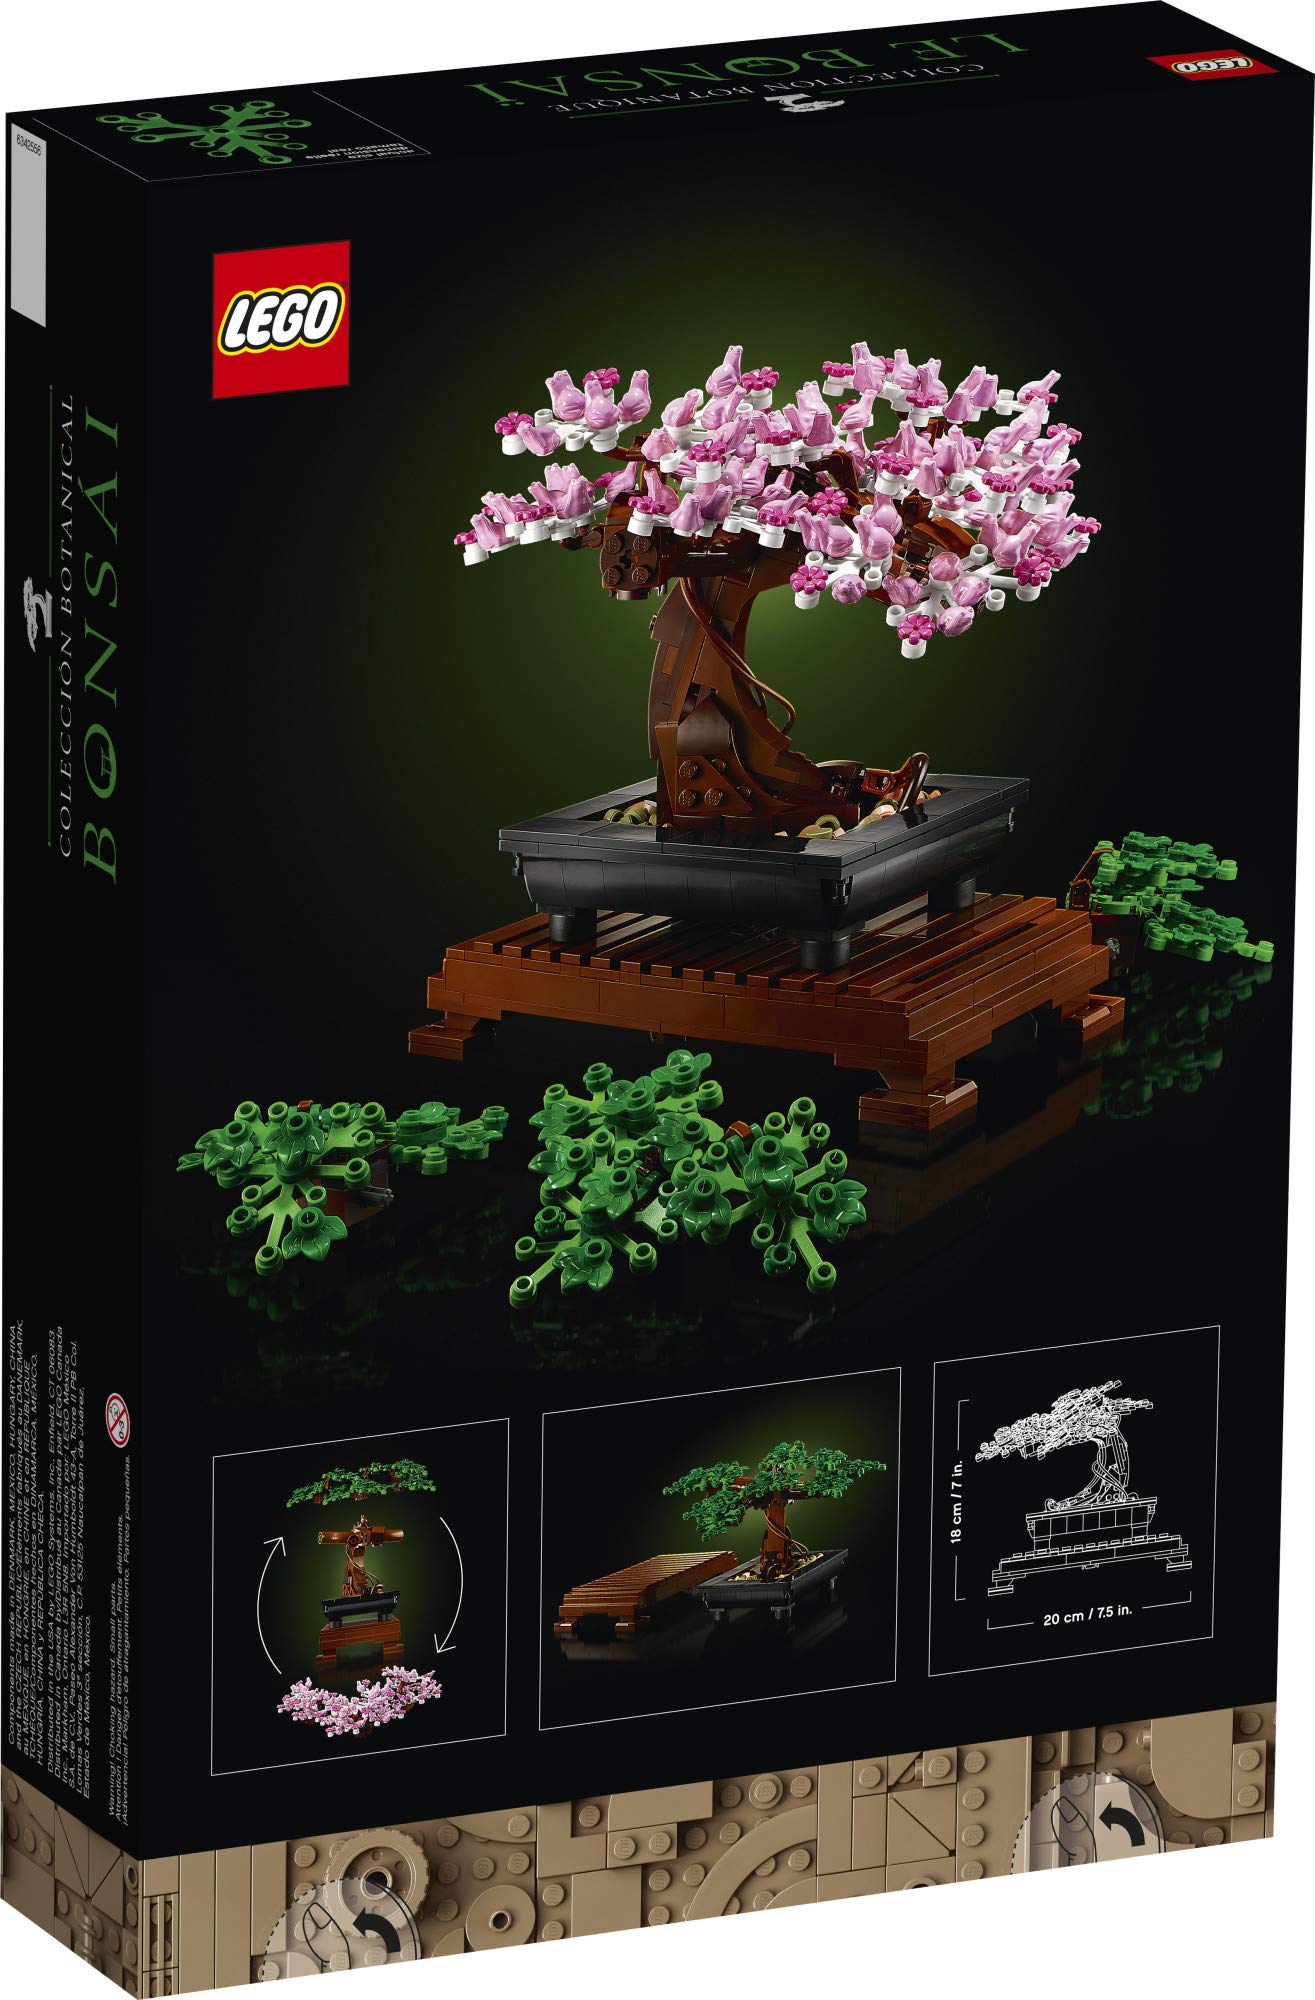 LEGO Bonsai Tree 10281 Building Kit, a Building Project to Focus The Mind with a Beautiful Display Piece to Enjoy (878 Pieces) (Like New, Open Box)